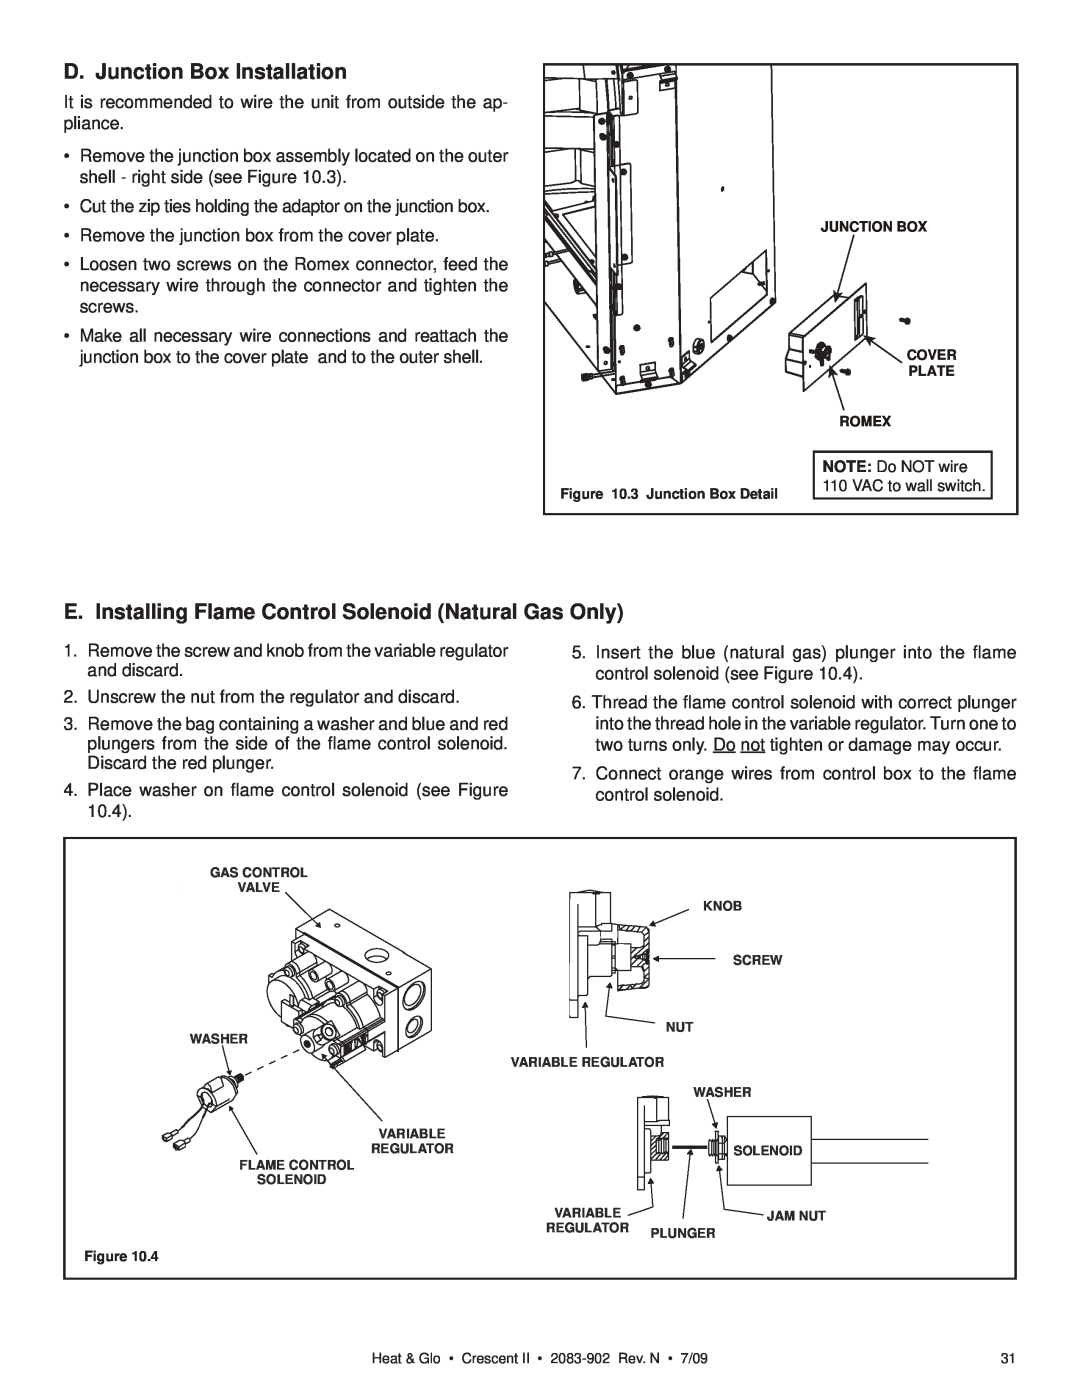 Heat & Glo LifeStyle CRESCENT II owner manual D. Junction Box Installation 